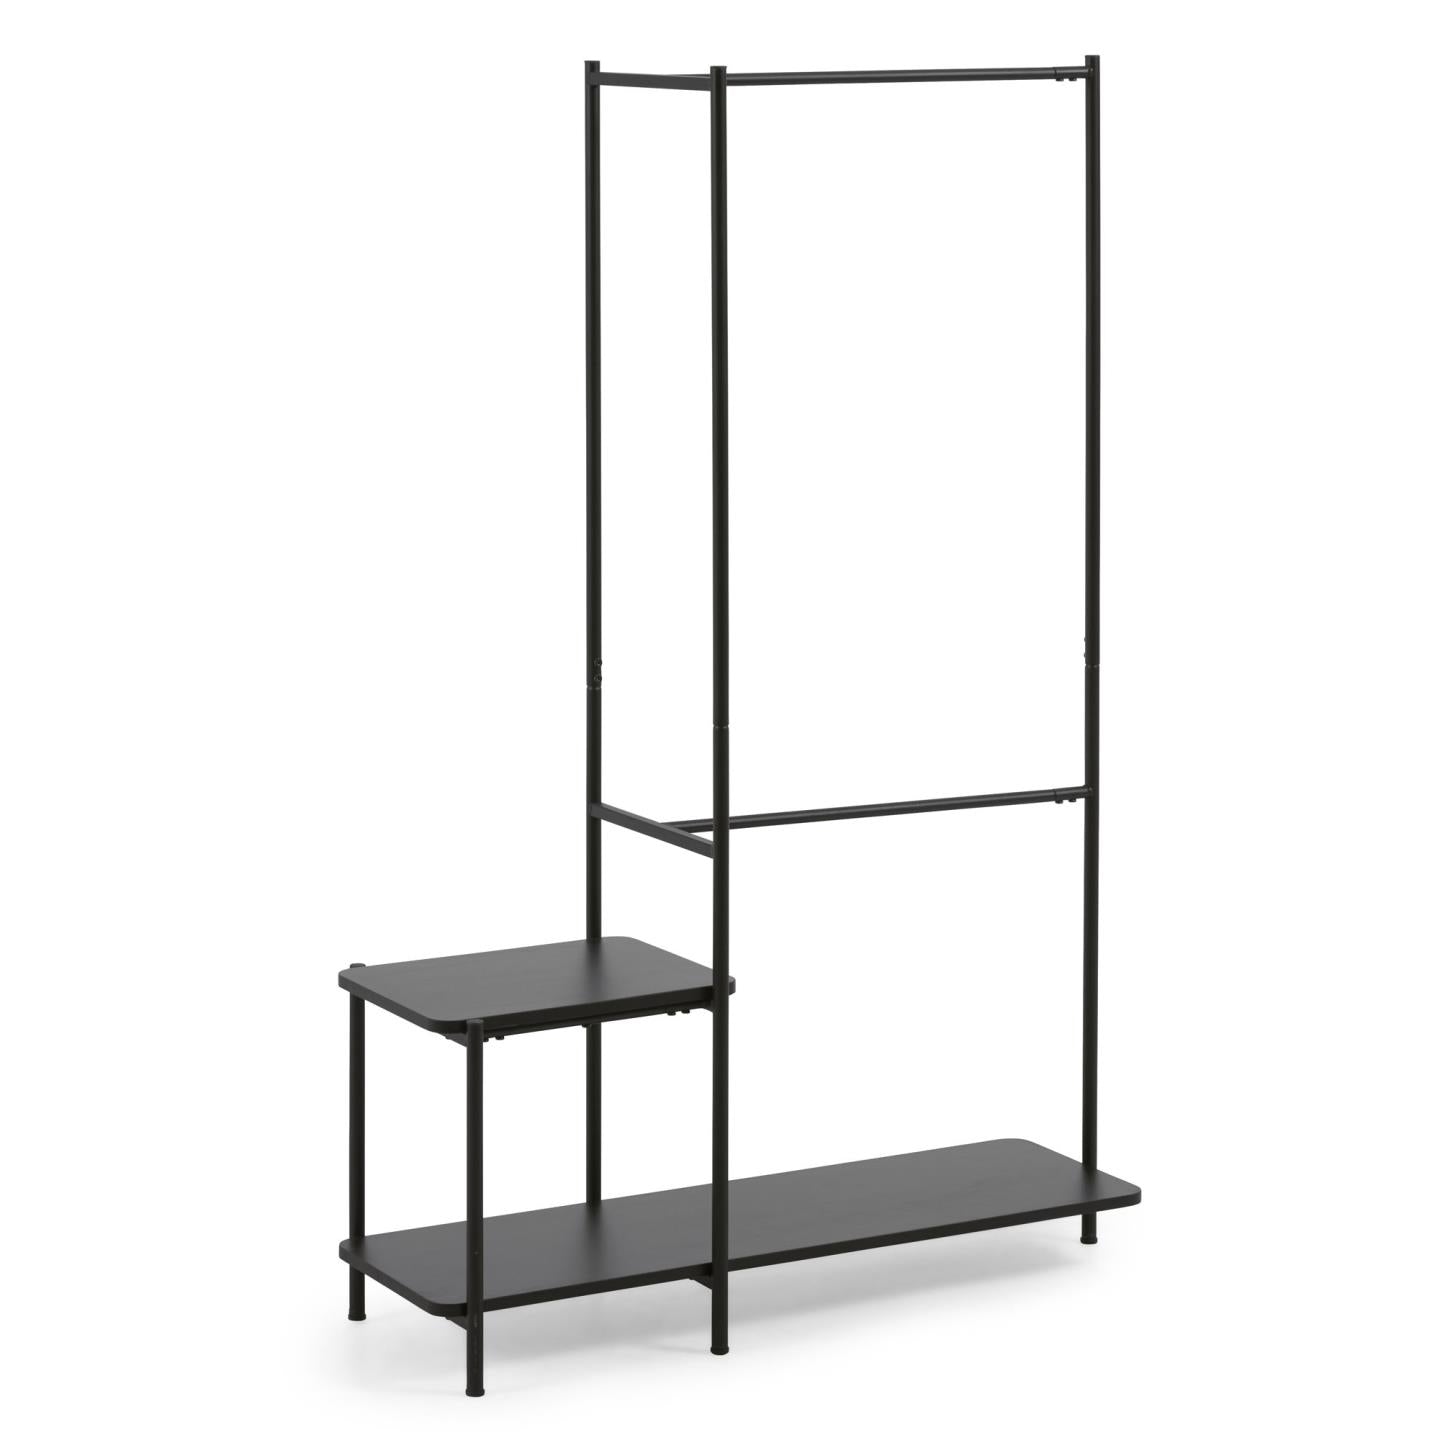 Galatia melamine and metal clothes rail with bench in black finish 100 x 150 cm